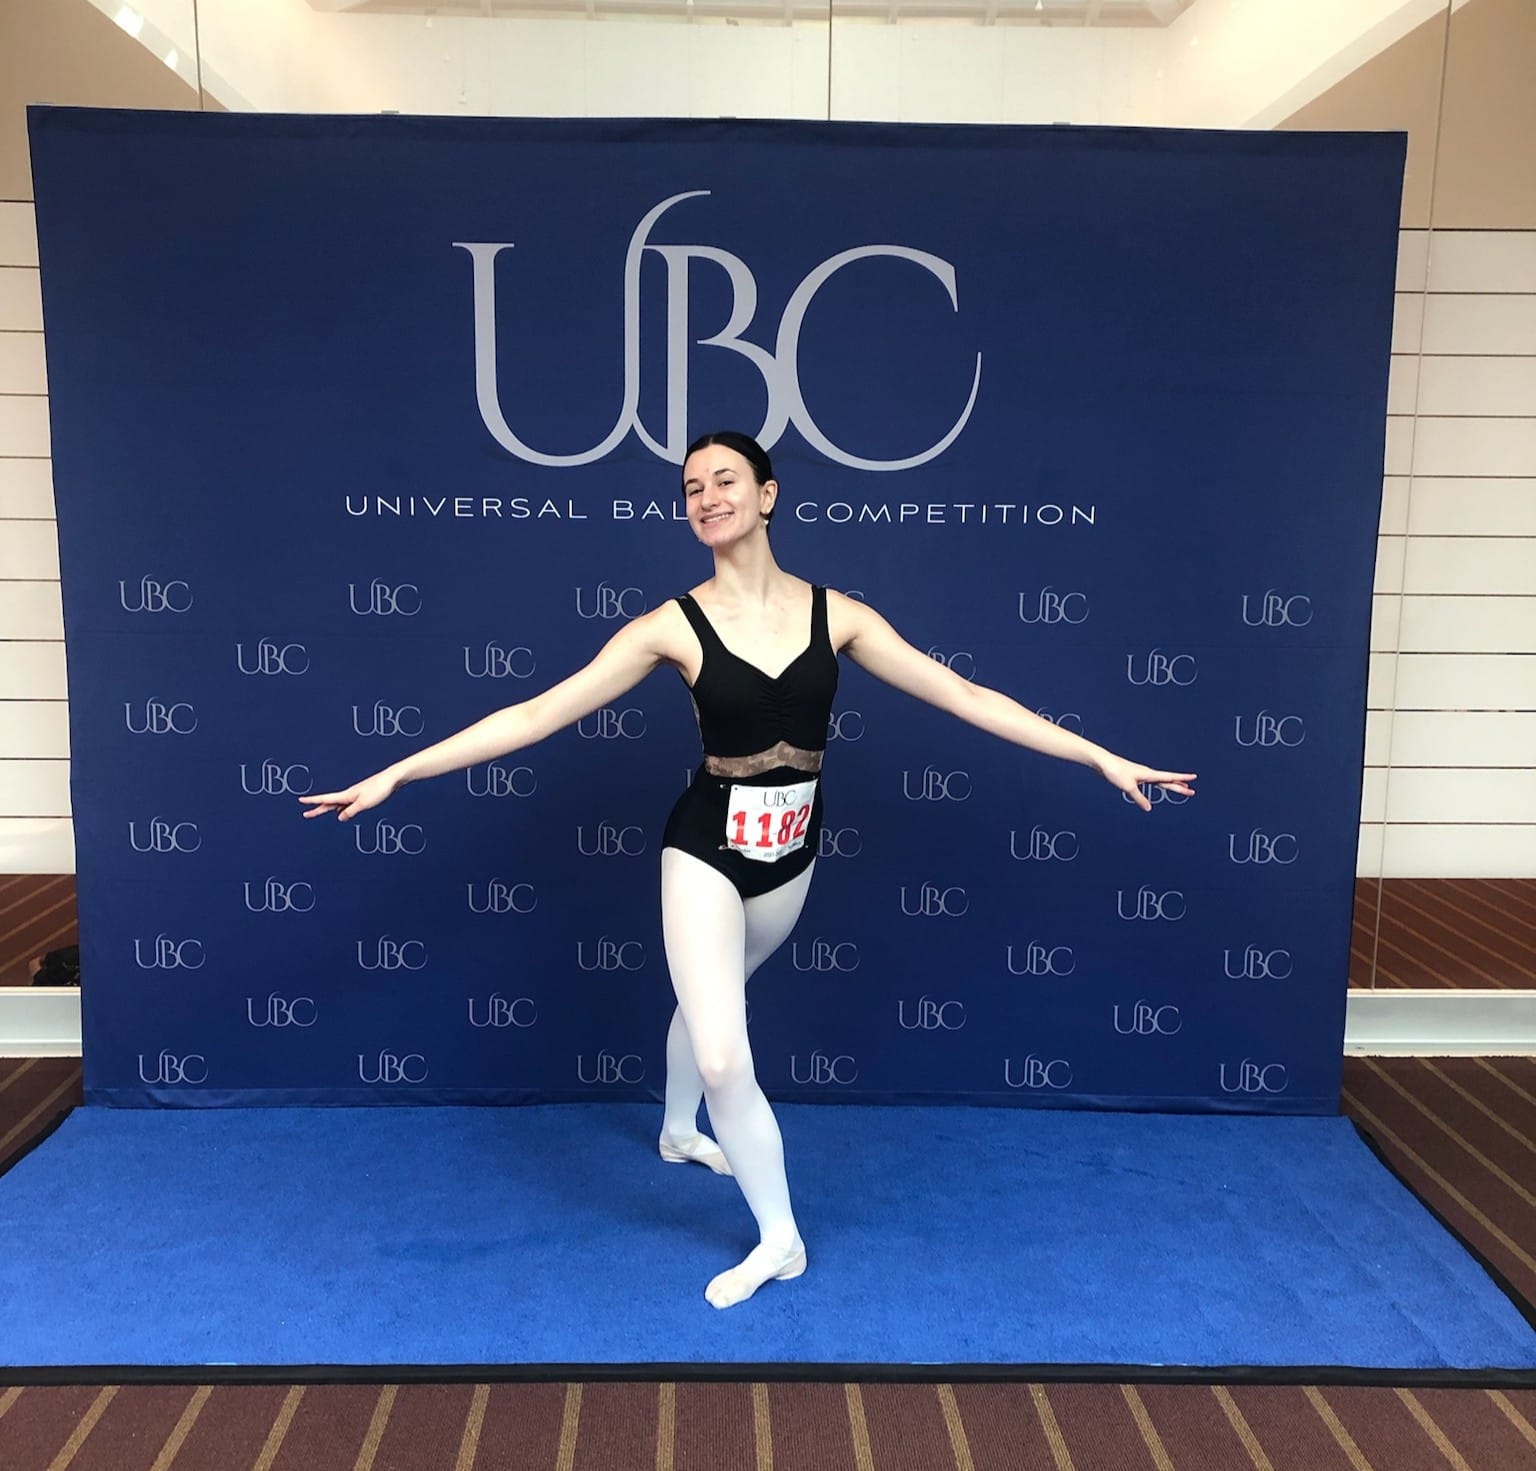 A student who attended the Universal Ballet Competition